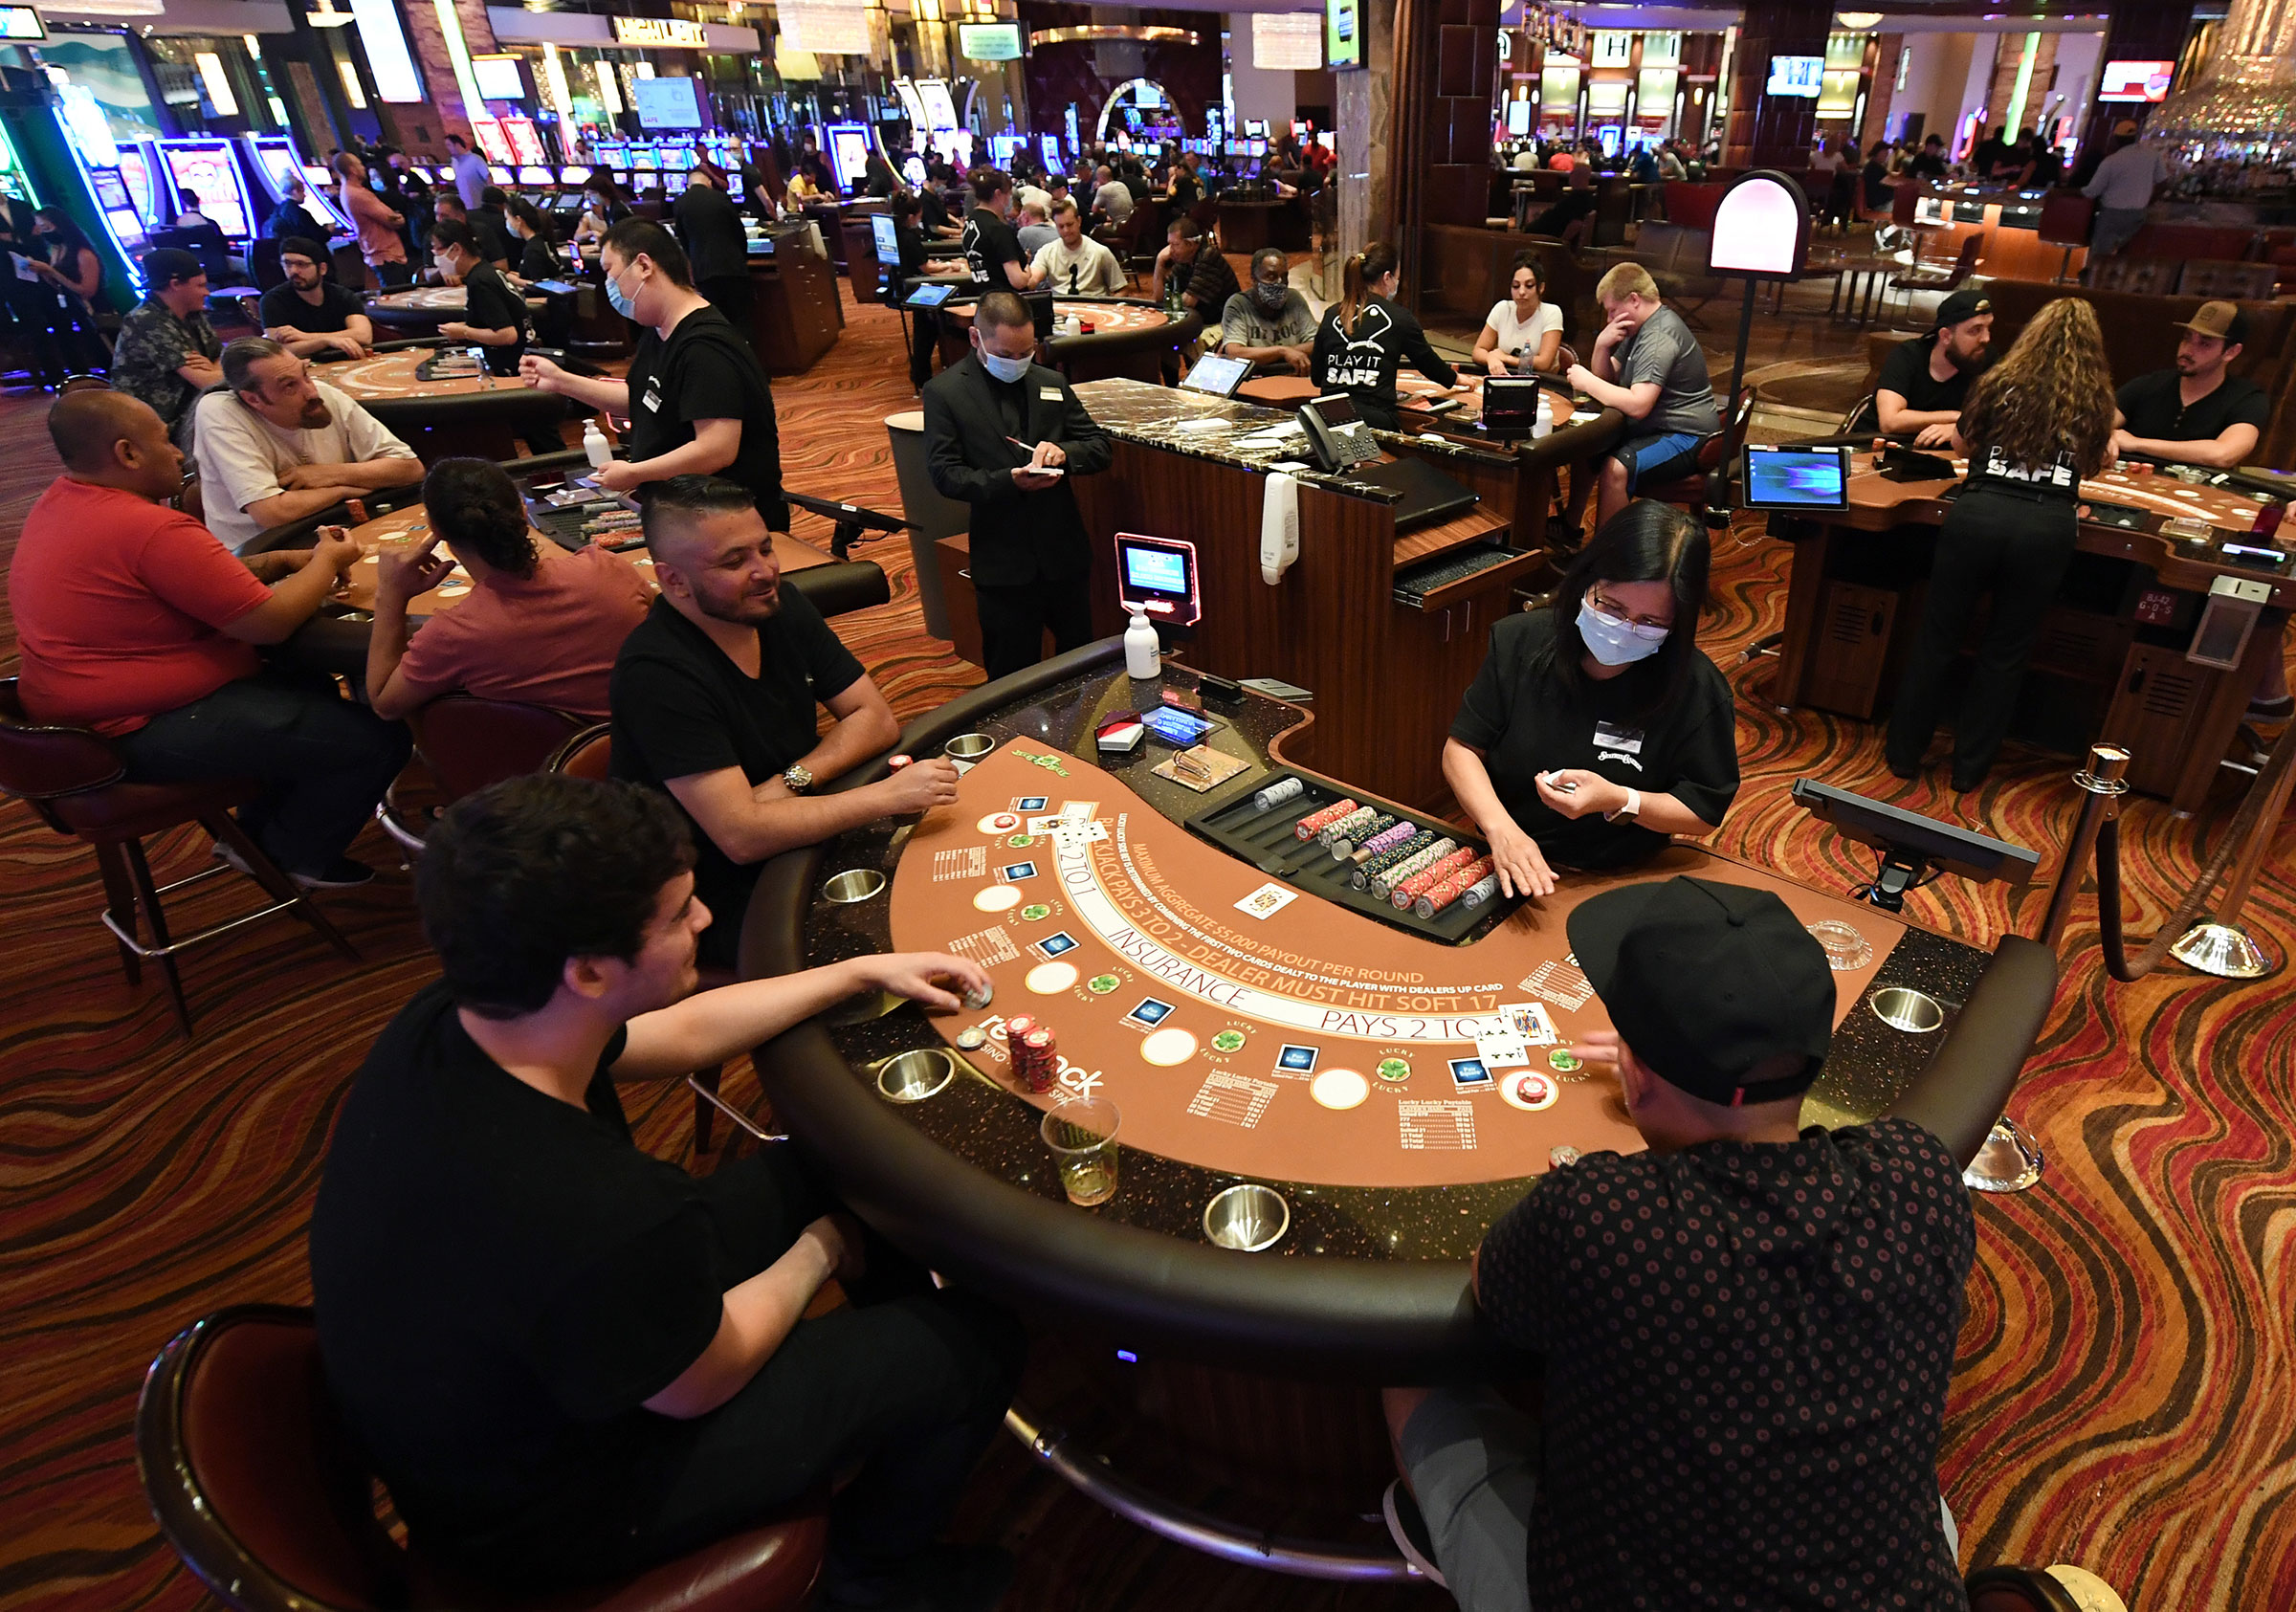 Guests play blackjack at tables with only three players allowed at a time at the Red Rock Resort after the property opened for the first time since being closed on March 17 because of the coronavirus pandemic on June 4, 2020 in Las Vegas, Nevada. (Ethan Miller—Getty Images)